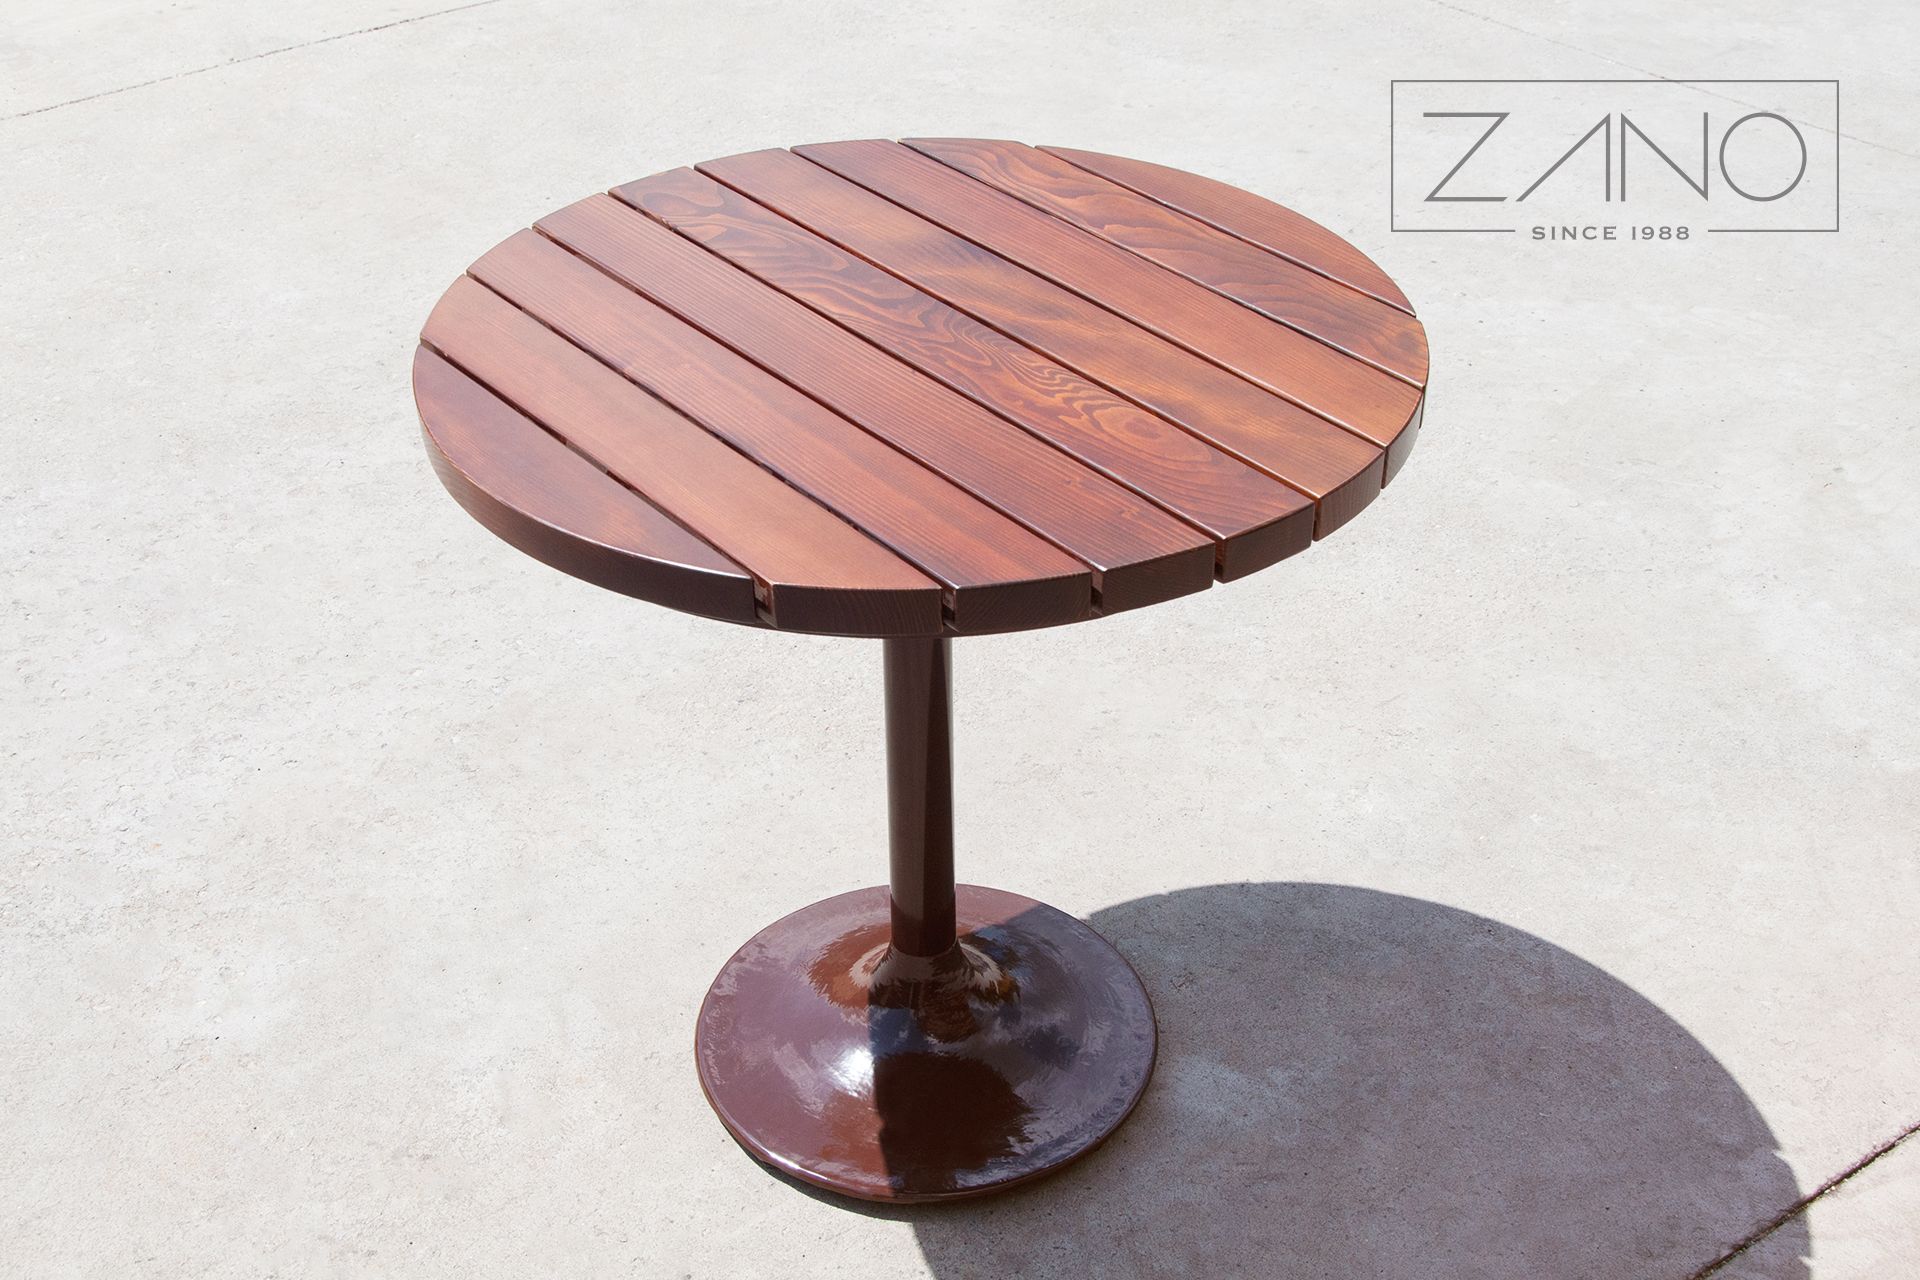 Coffe table made of iron cast and carbon steel and wooden table top